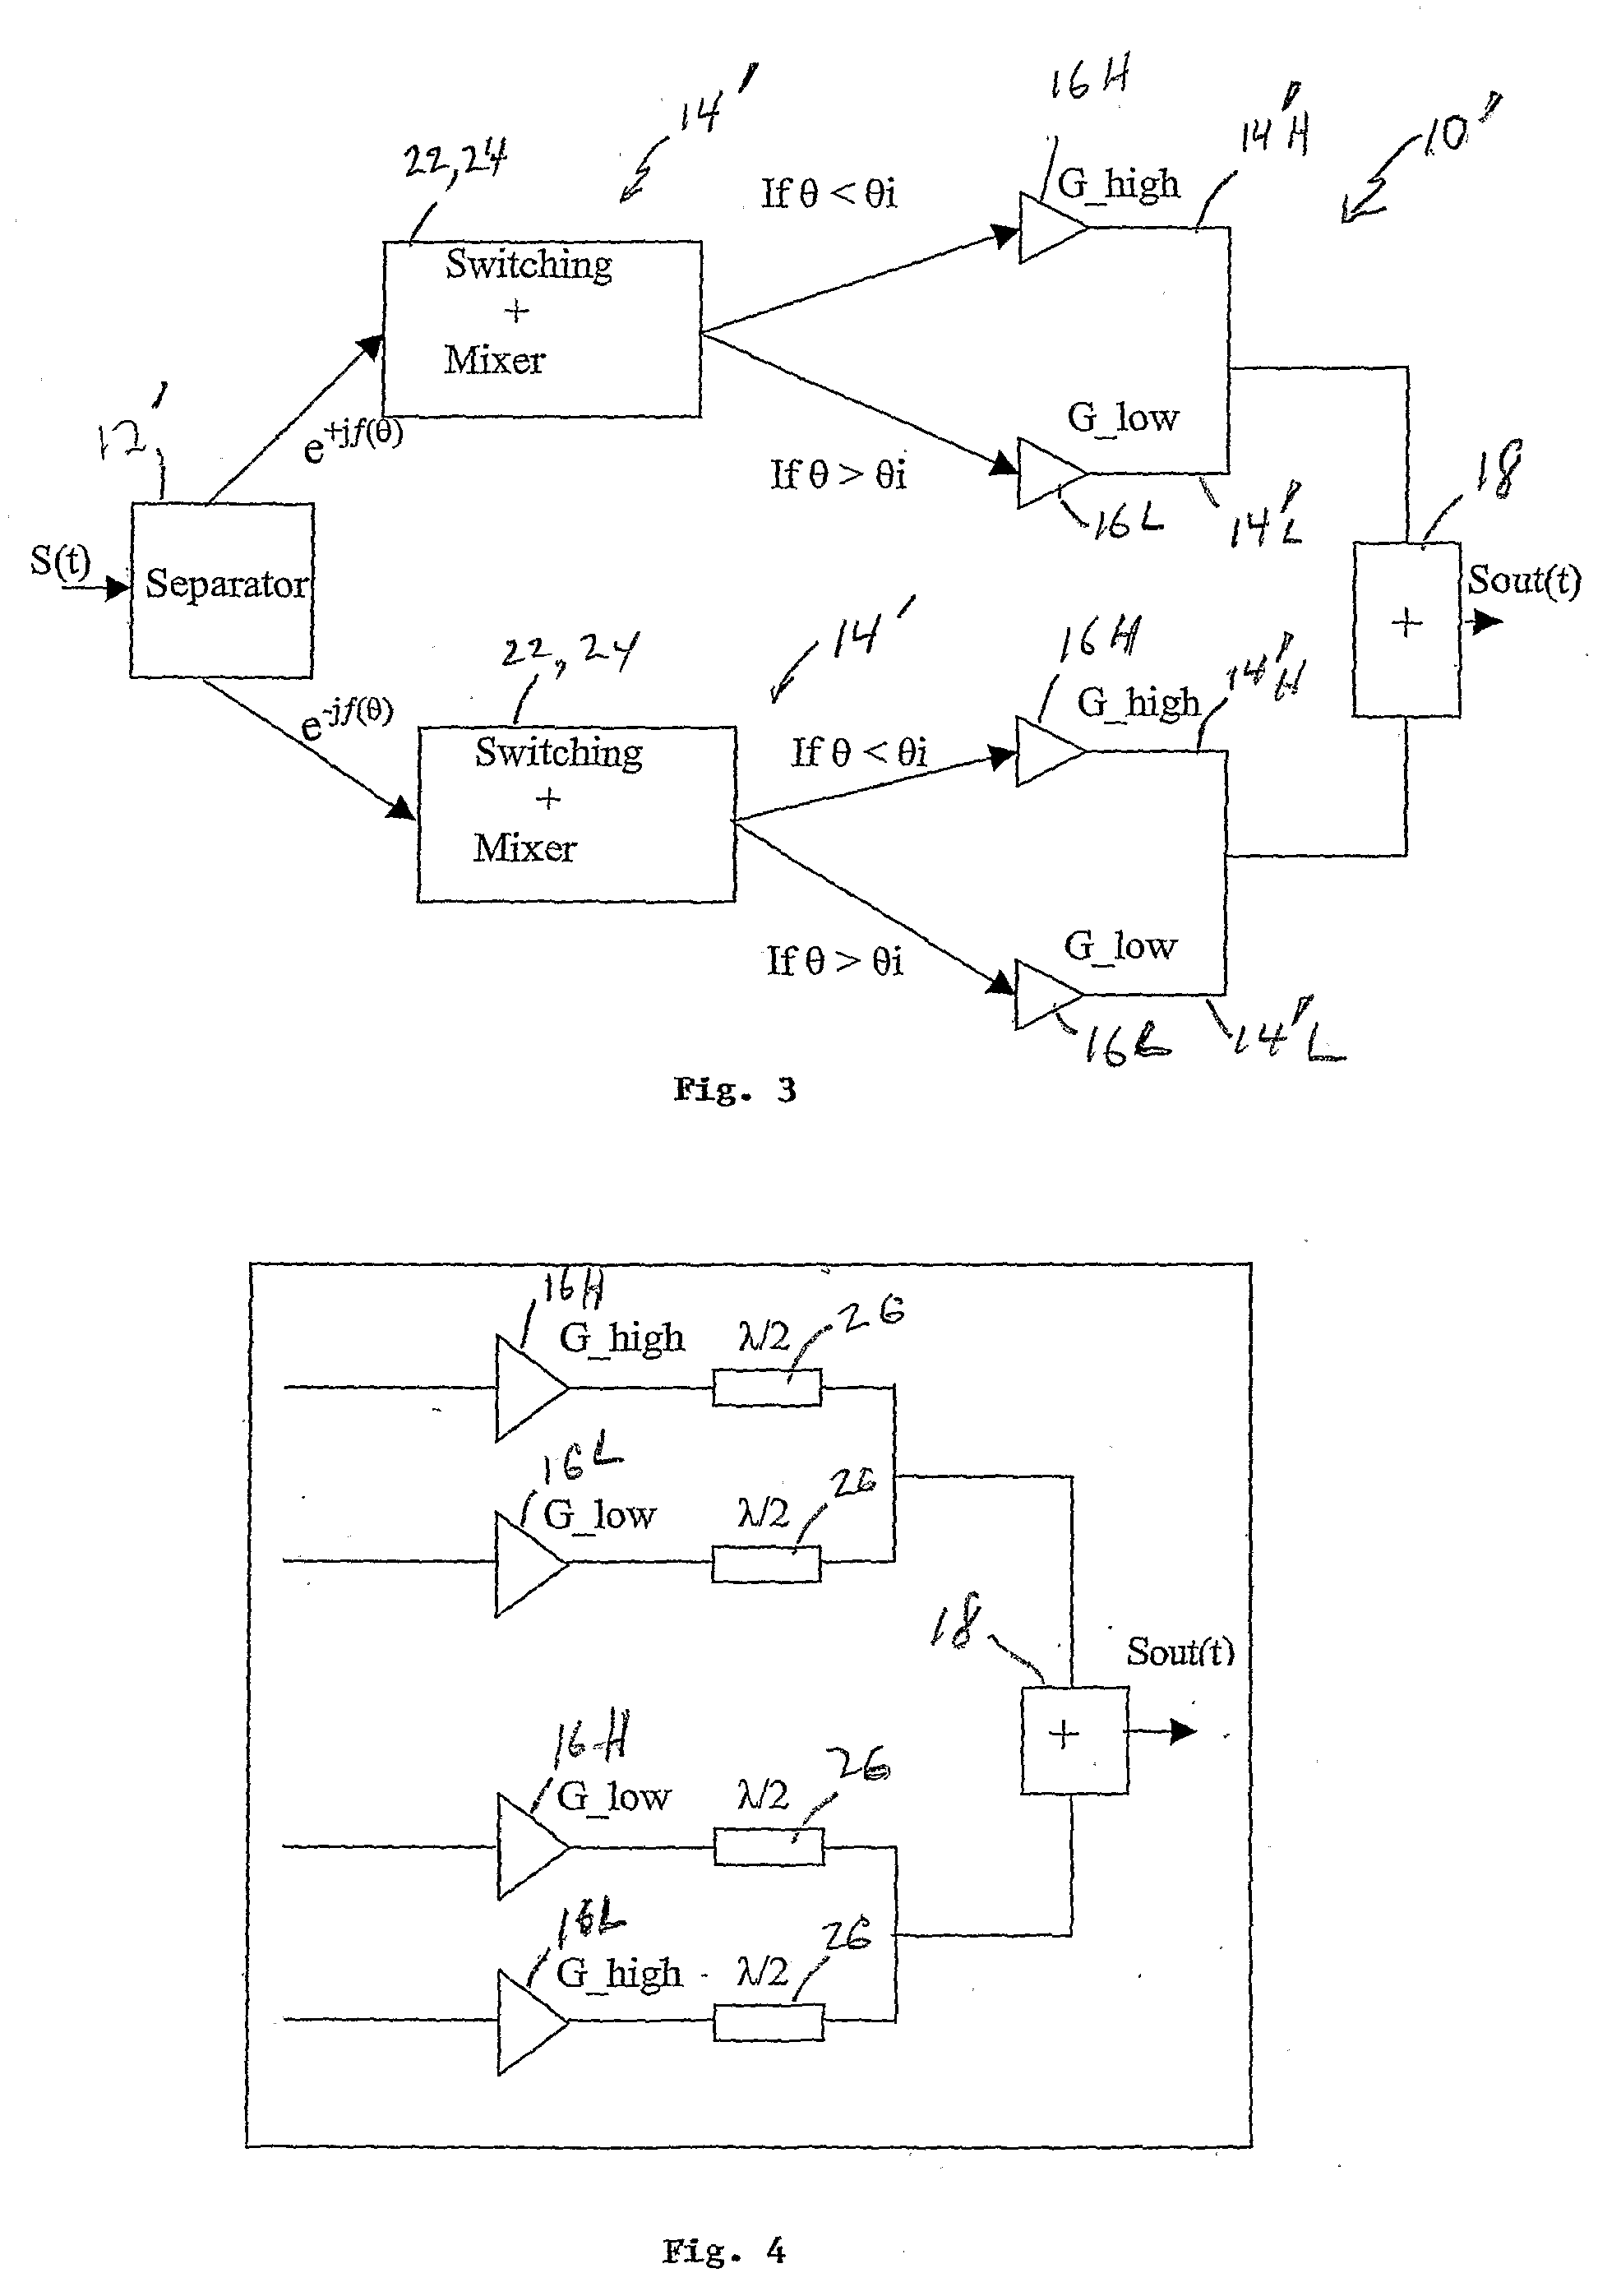 High efficiency rf transmitter system using non-linear amplifiers